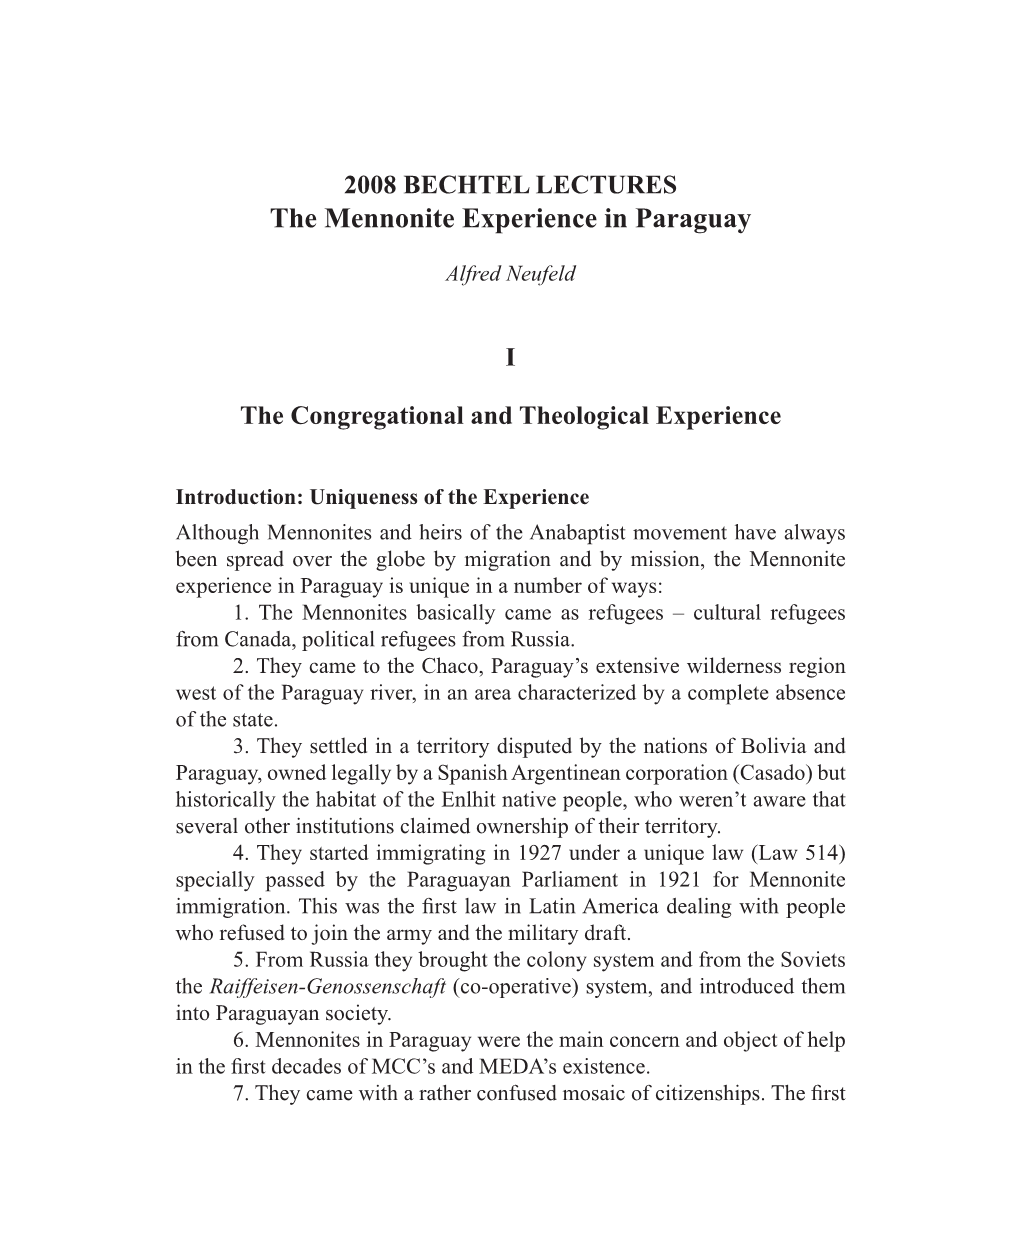 2008 Bechtel Lecture, the Congregational and Theological